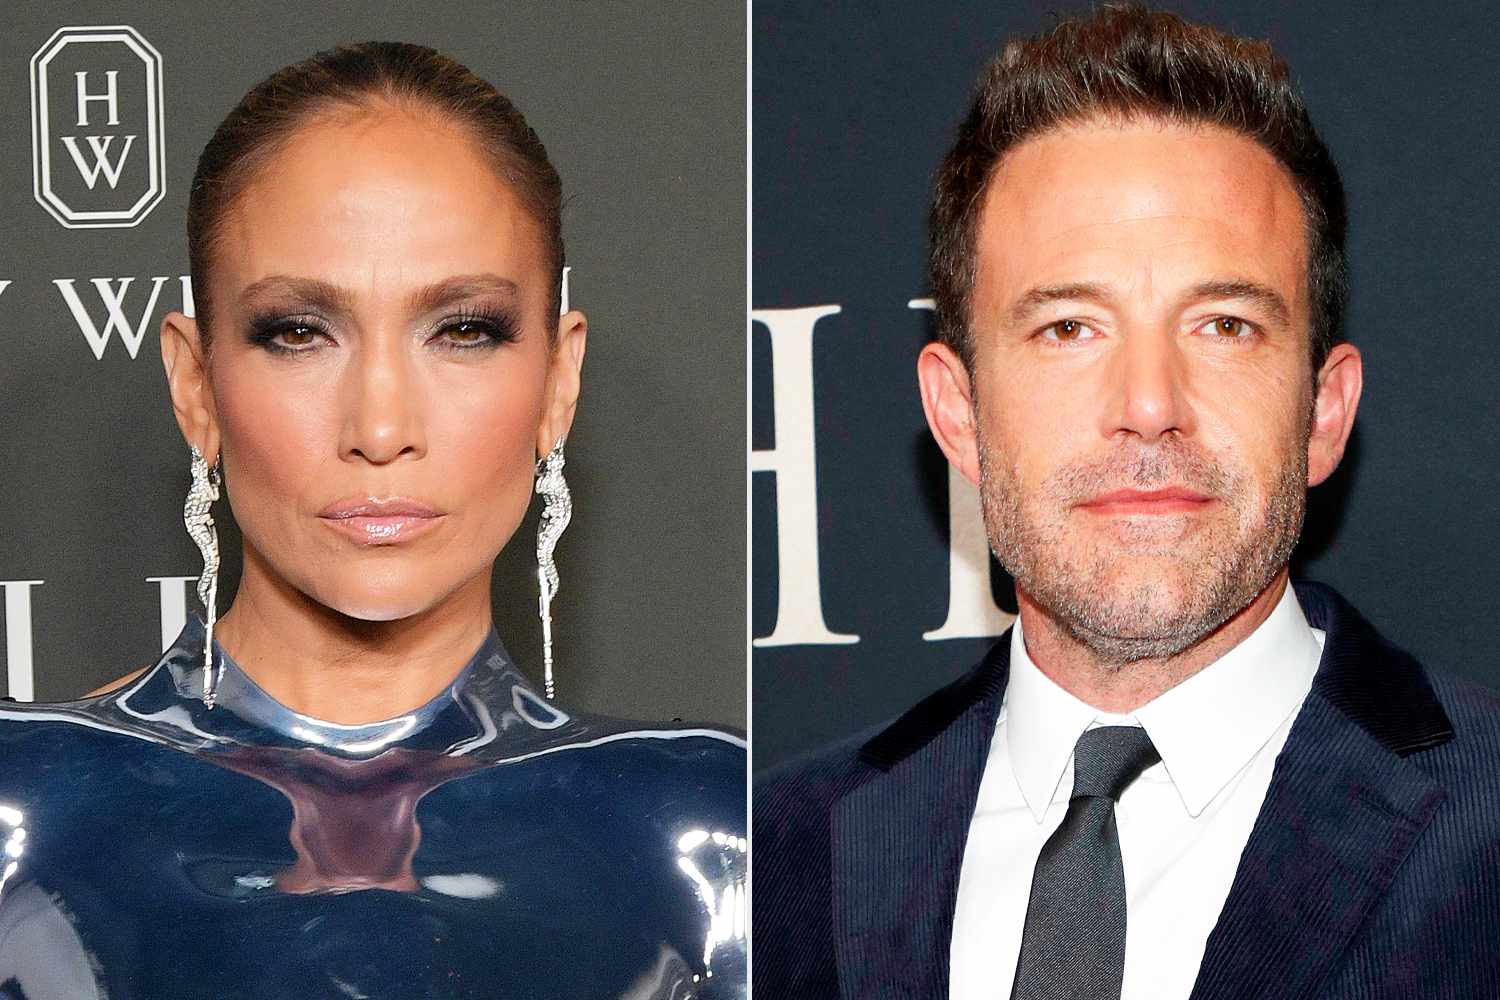 Ben Affleck Moves His Things Out of Shared Mansion with Jennifer Lopez amid Marriage Strain (Source)